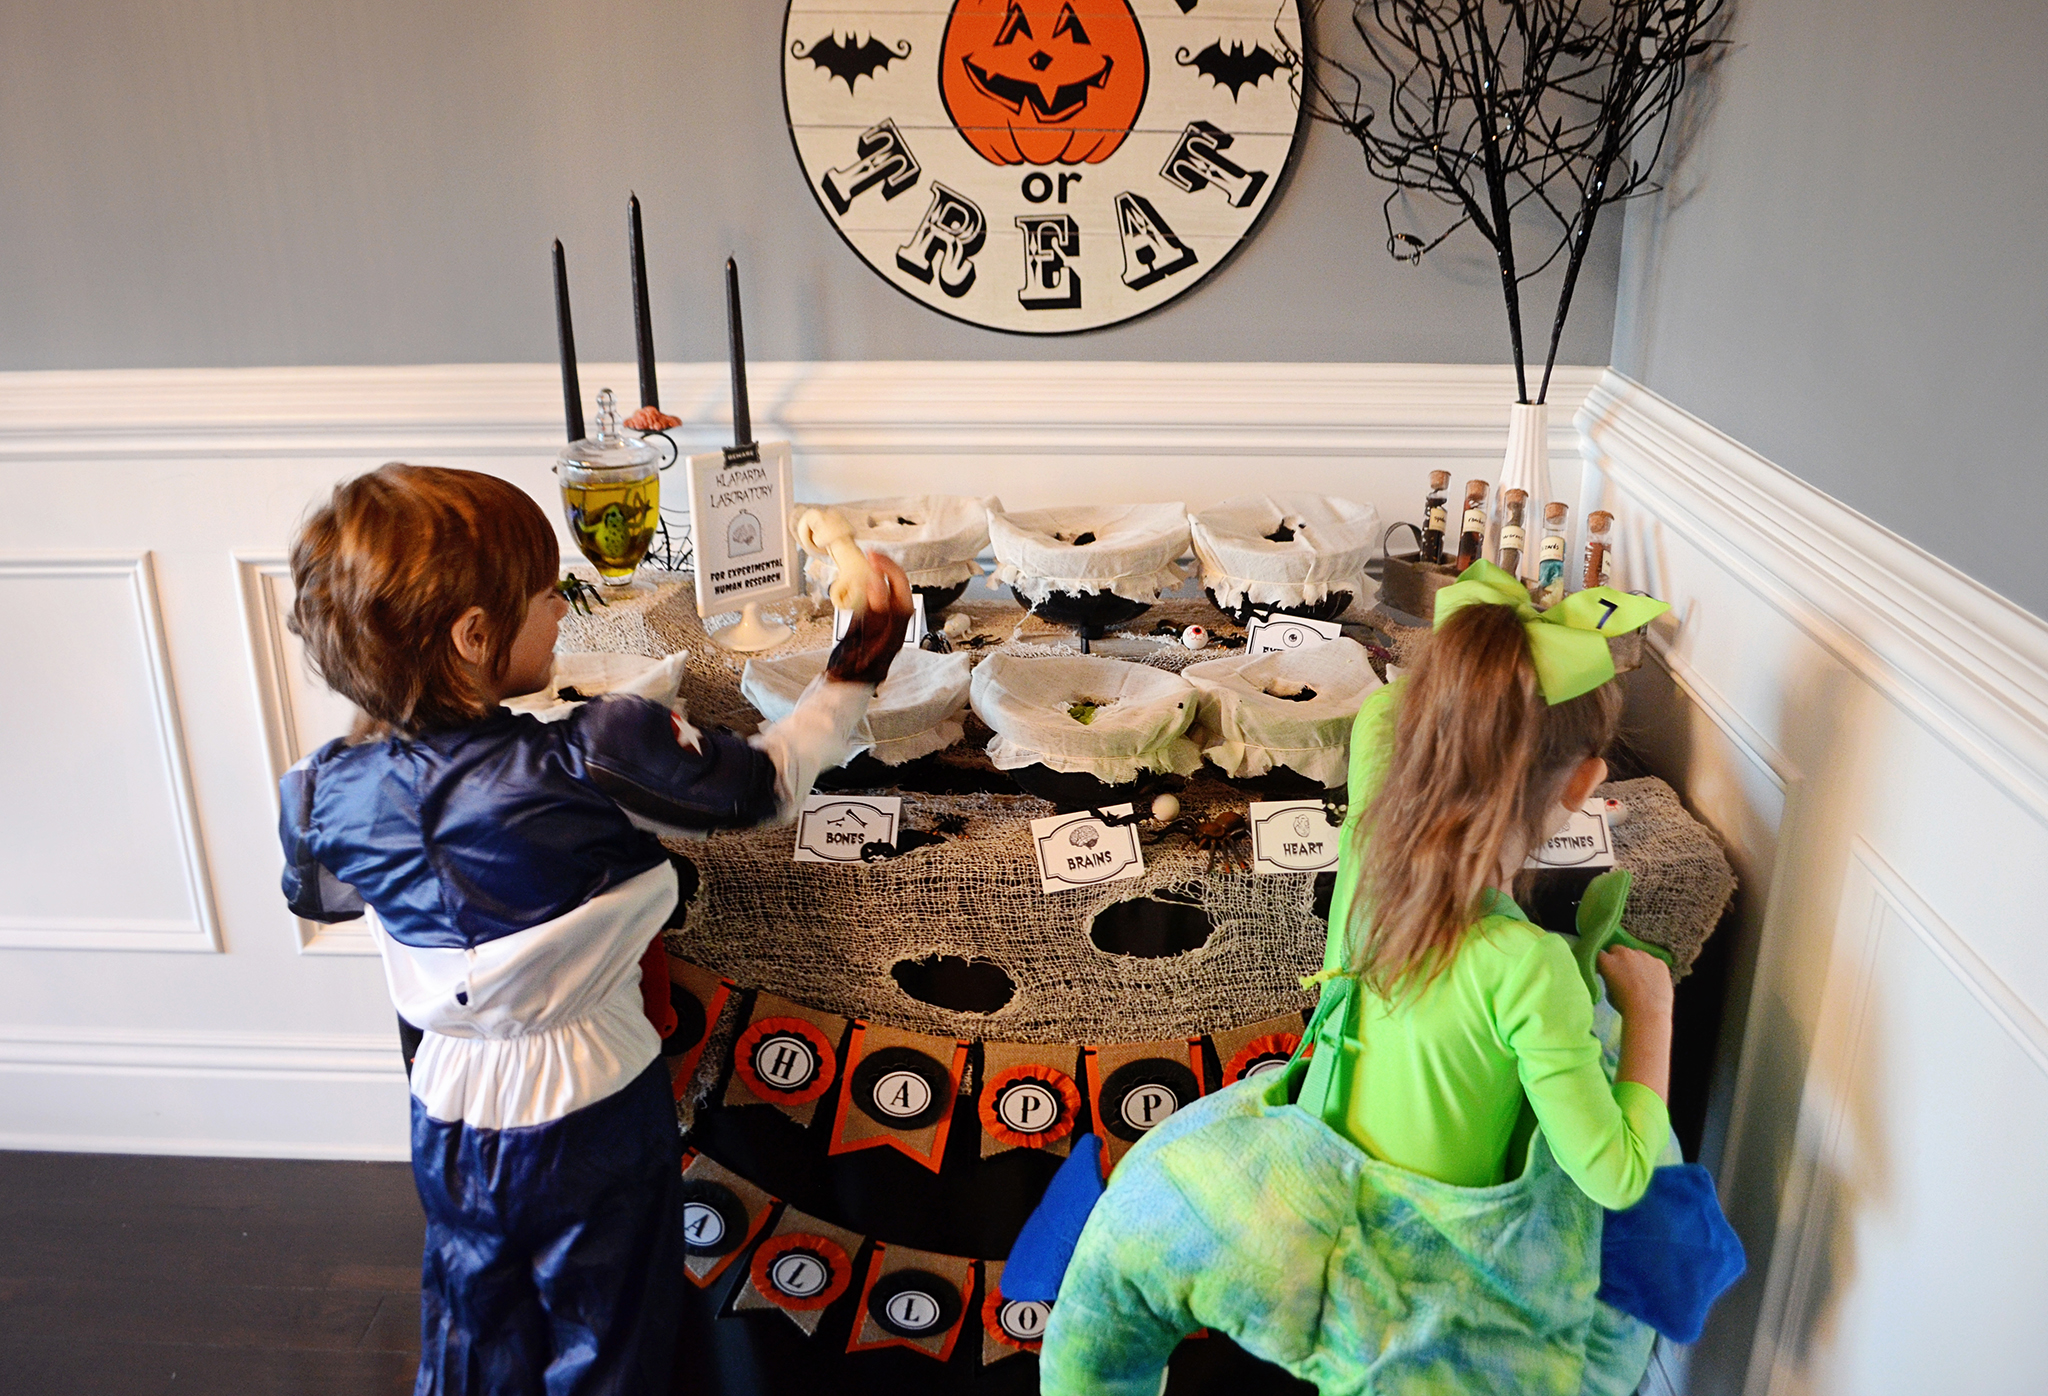 Have a creepy, crawly Happy Halloween "touch and feel" table!